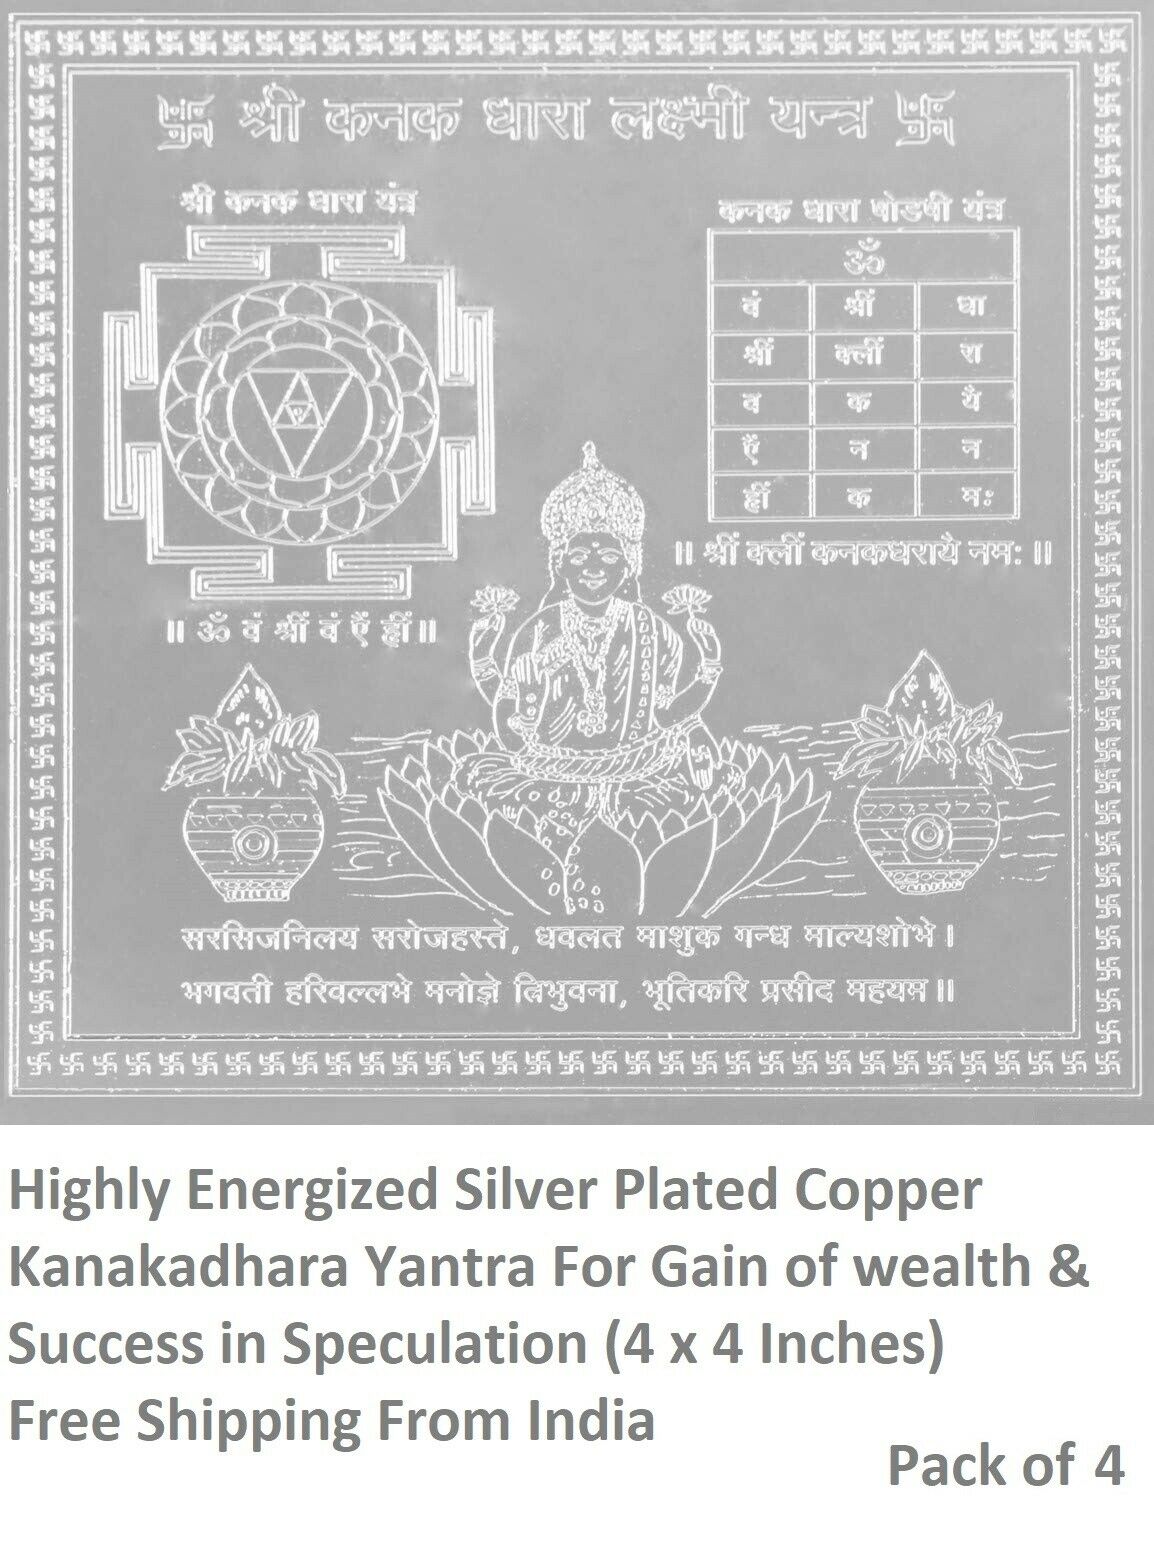 4 X Highly Energized Silver Plated Copper Kanakdhara Yantra For Wealth & Success